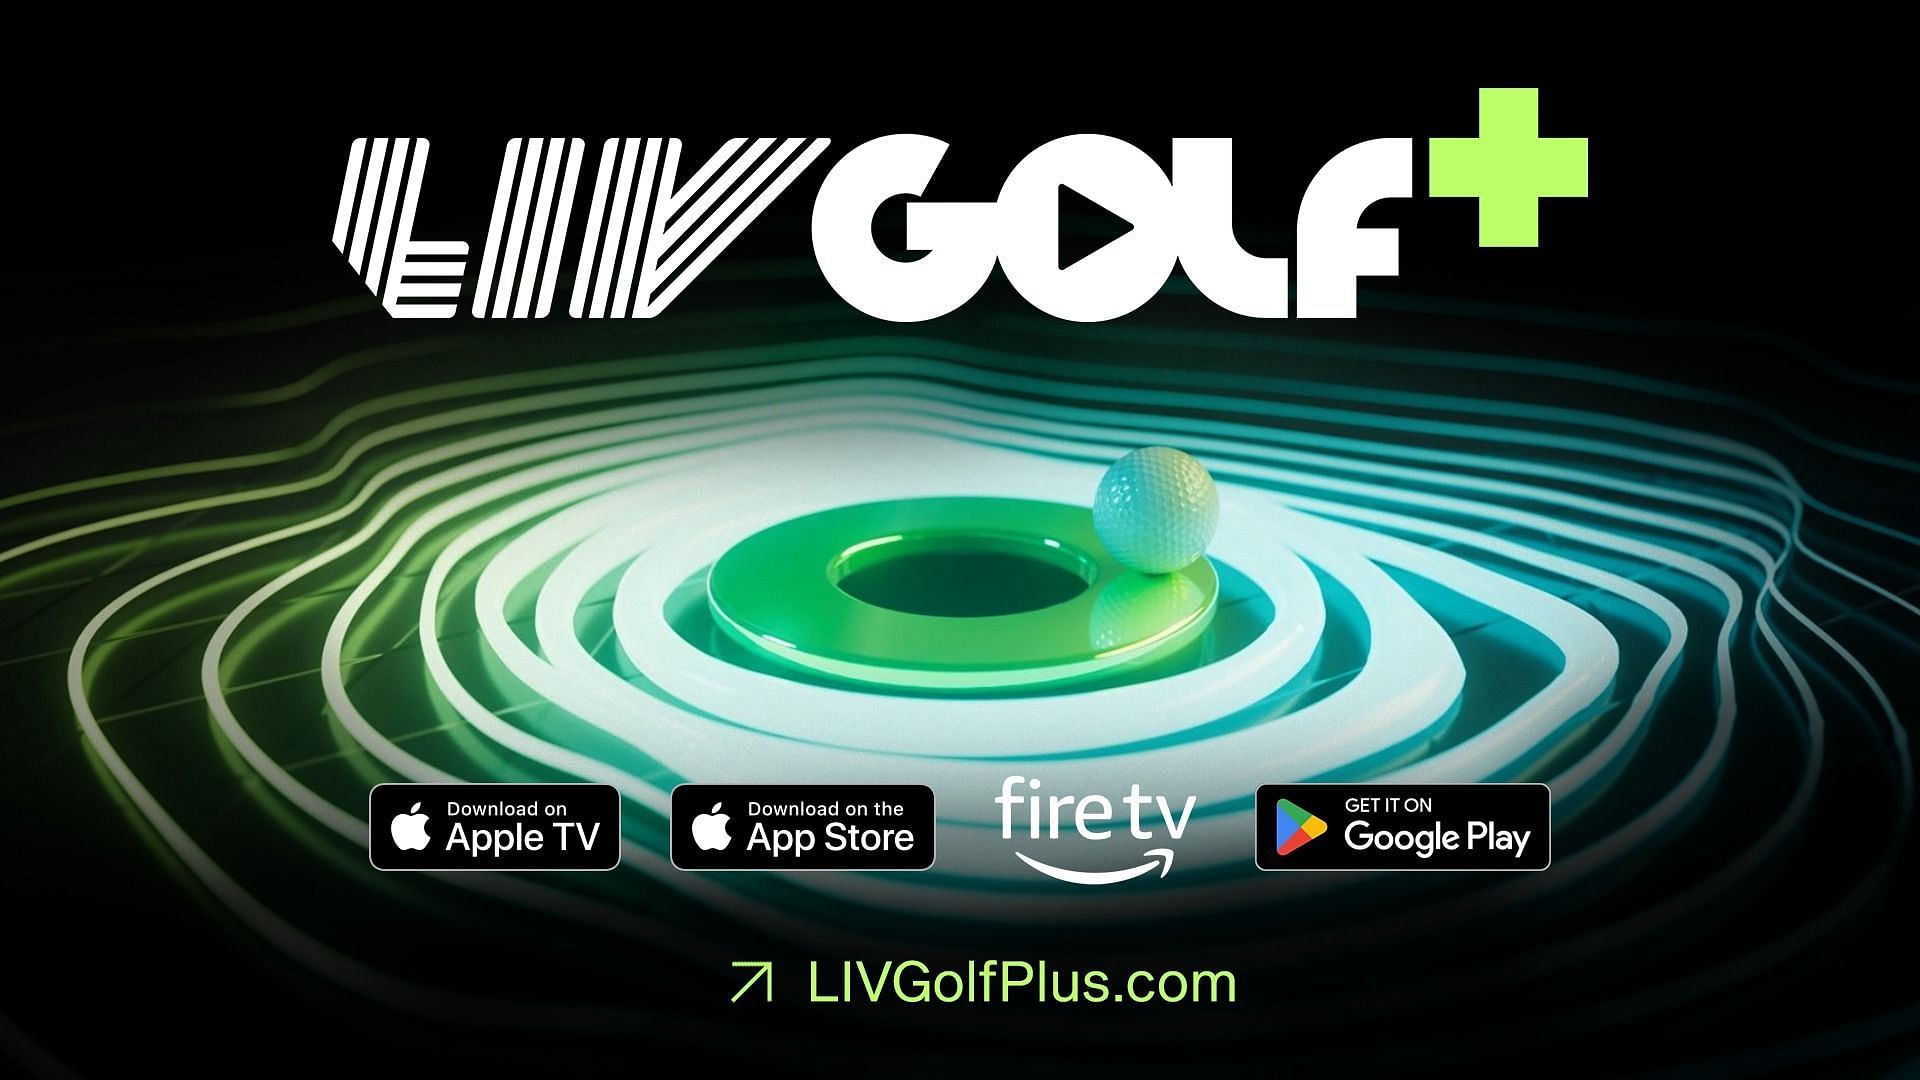 LIV Golf Plus will stream the LIV Golf events outside the United States